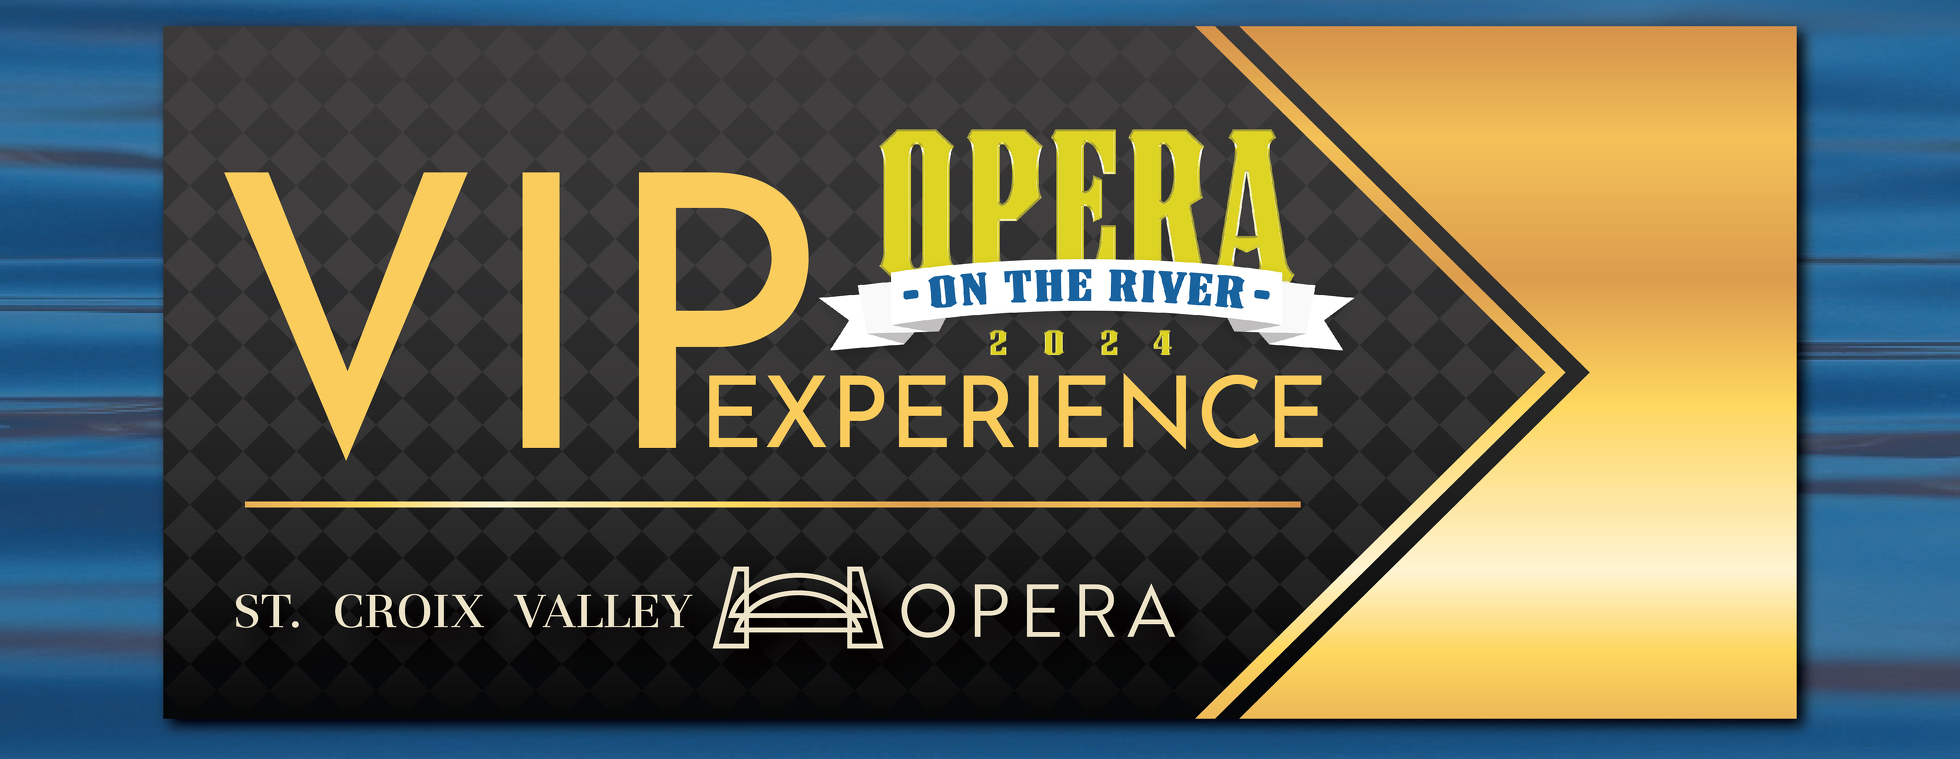 Opera on the River 2024 VIP Experience 